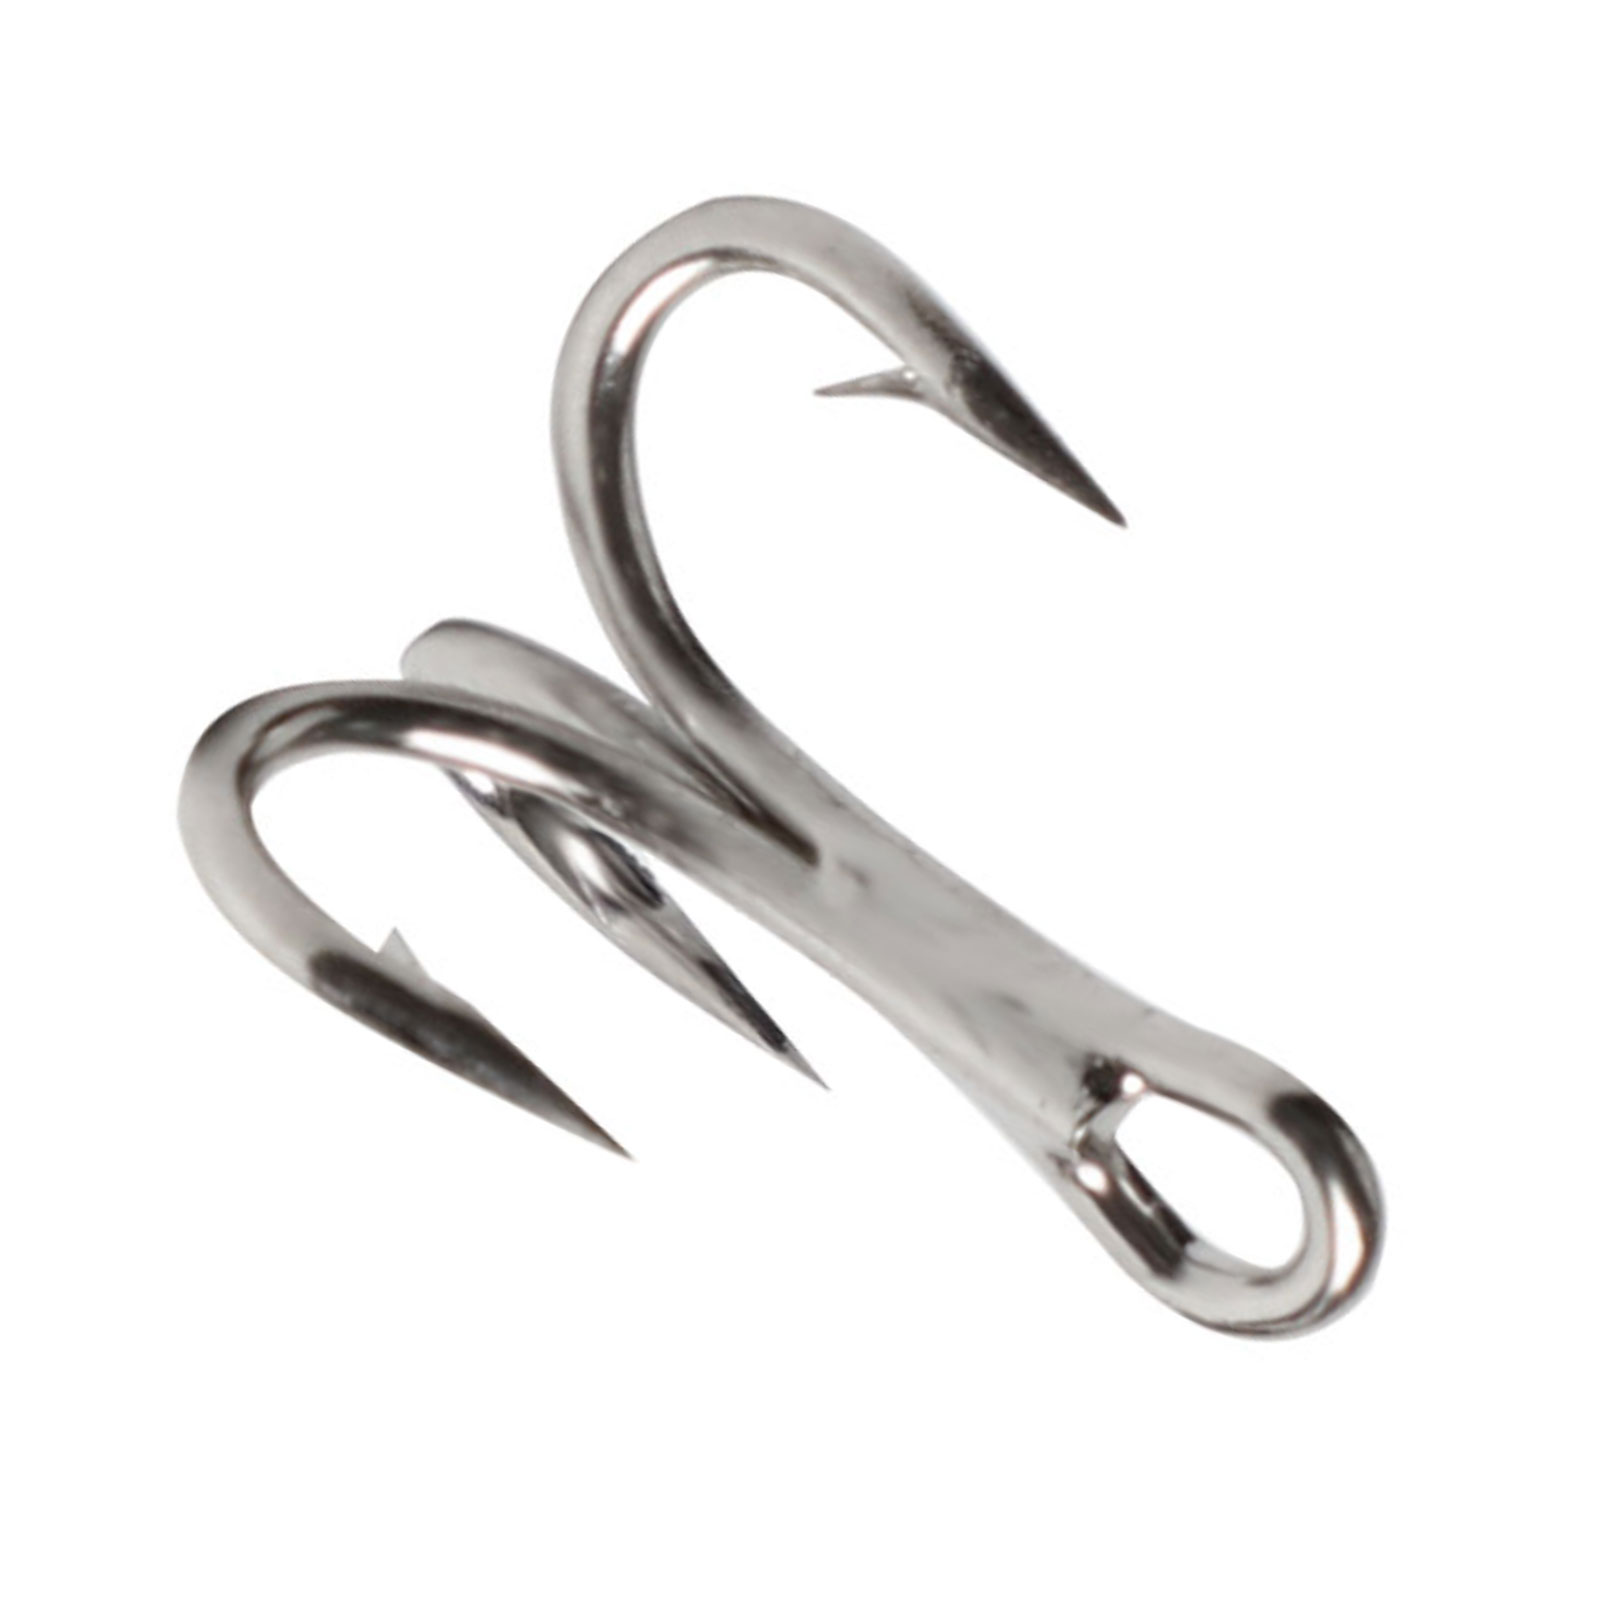 FREE FISHER 100pcs/Lot Fishing Hooks High Carbon Steel 3551 6X Strong 8# Silver Treble Fishhook Long-Tips O'Shaughnessy Triple Hook